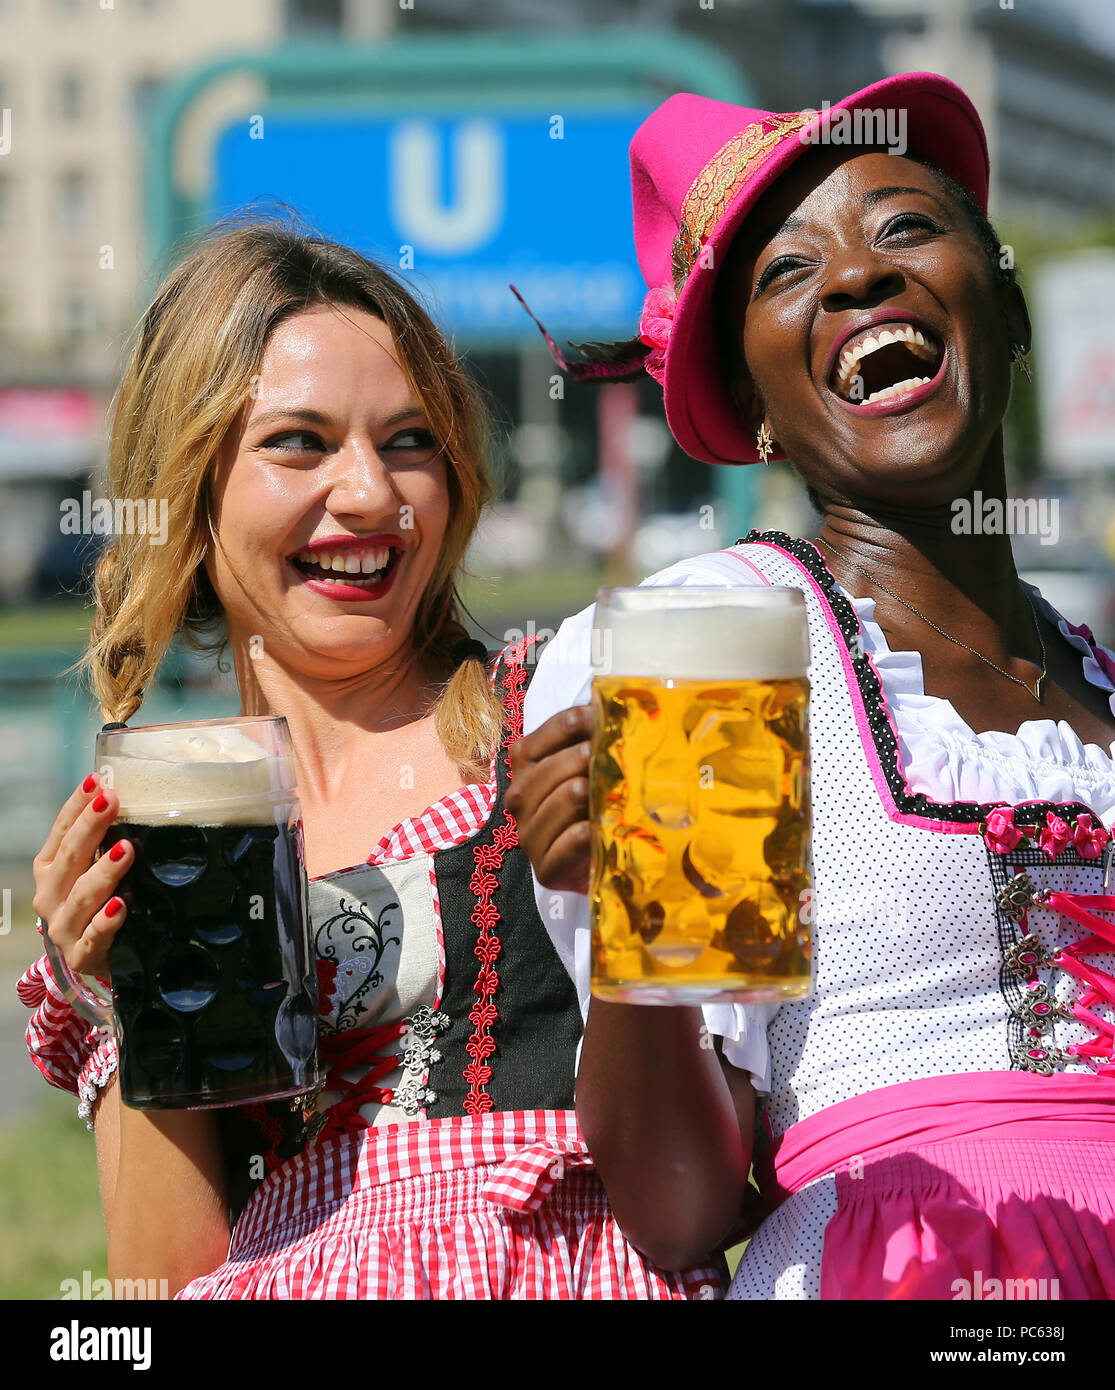 Berlin, Germany. 24th July, 2018. Models Ayanna (r) and Jacquline present draught beer during a photo shoot for the 22nd International Berlin Beer Festival on Karl-Marx-Allee in the district of Friedrichshain-Kreuzberg. The beer festival will take place from 03 to 05 August 2018, between Frankfurter Tor and Strausberger Square. Credit: Wolfgang Kumm/dpa | usage worldwide/dpa/Alamy Live News Stock Photo